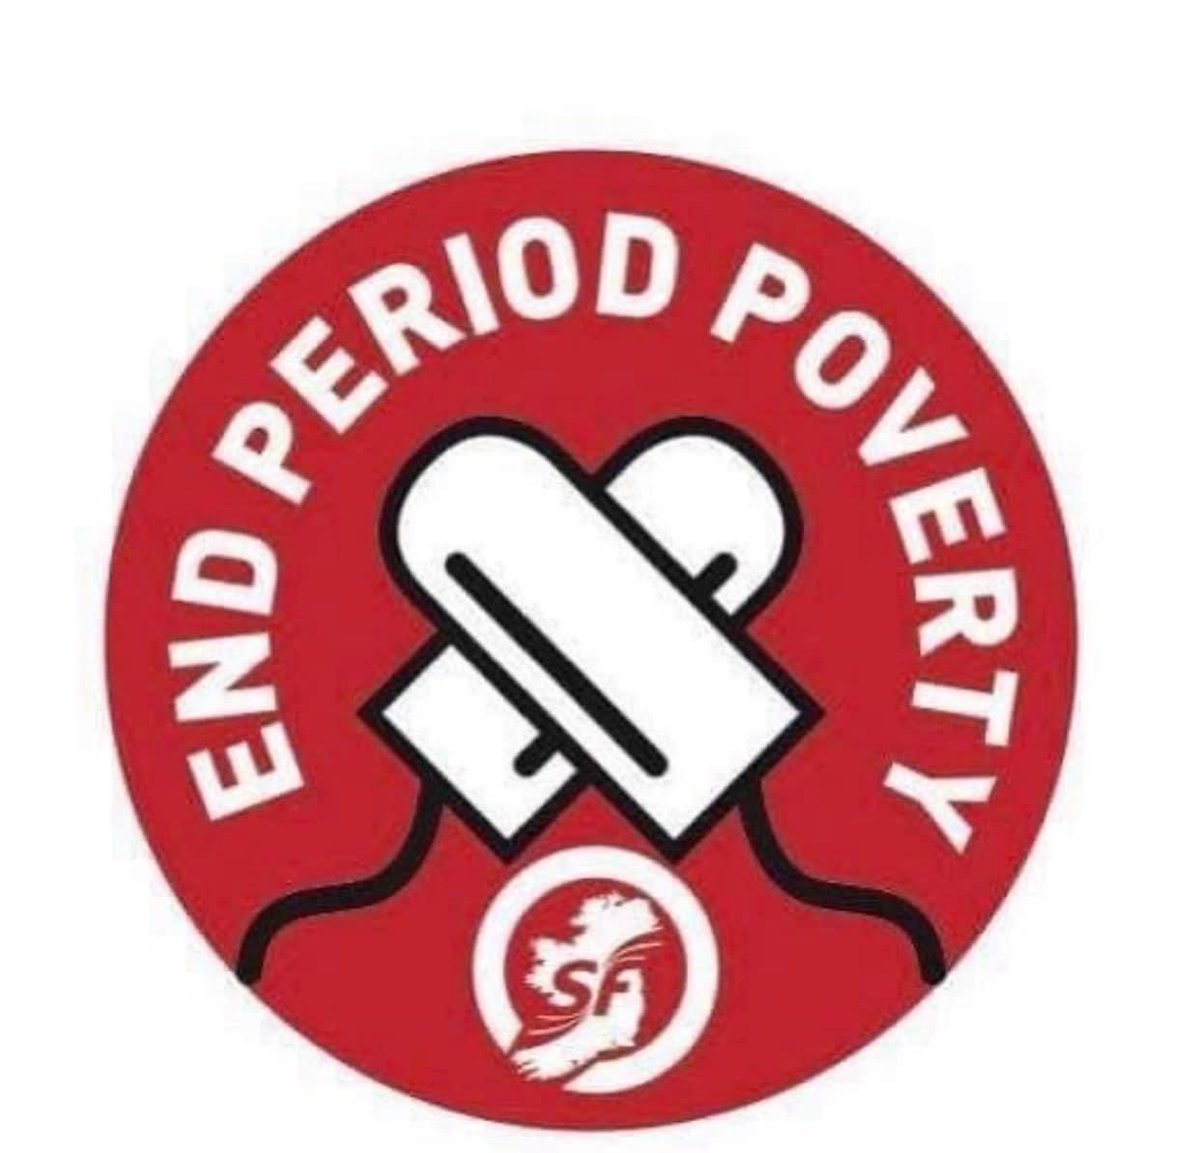 Great news! The executive have confirmed that free period products will be made available from the 13th May This has been a long campaign from many campaigners, and I am glad to have played my part first bringing the motion to Derry &strabane council in 2019 #periodpoverty